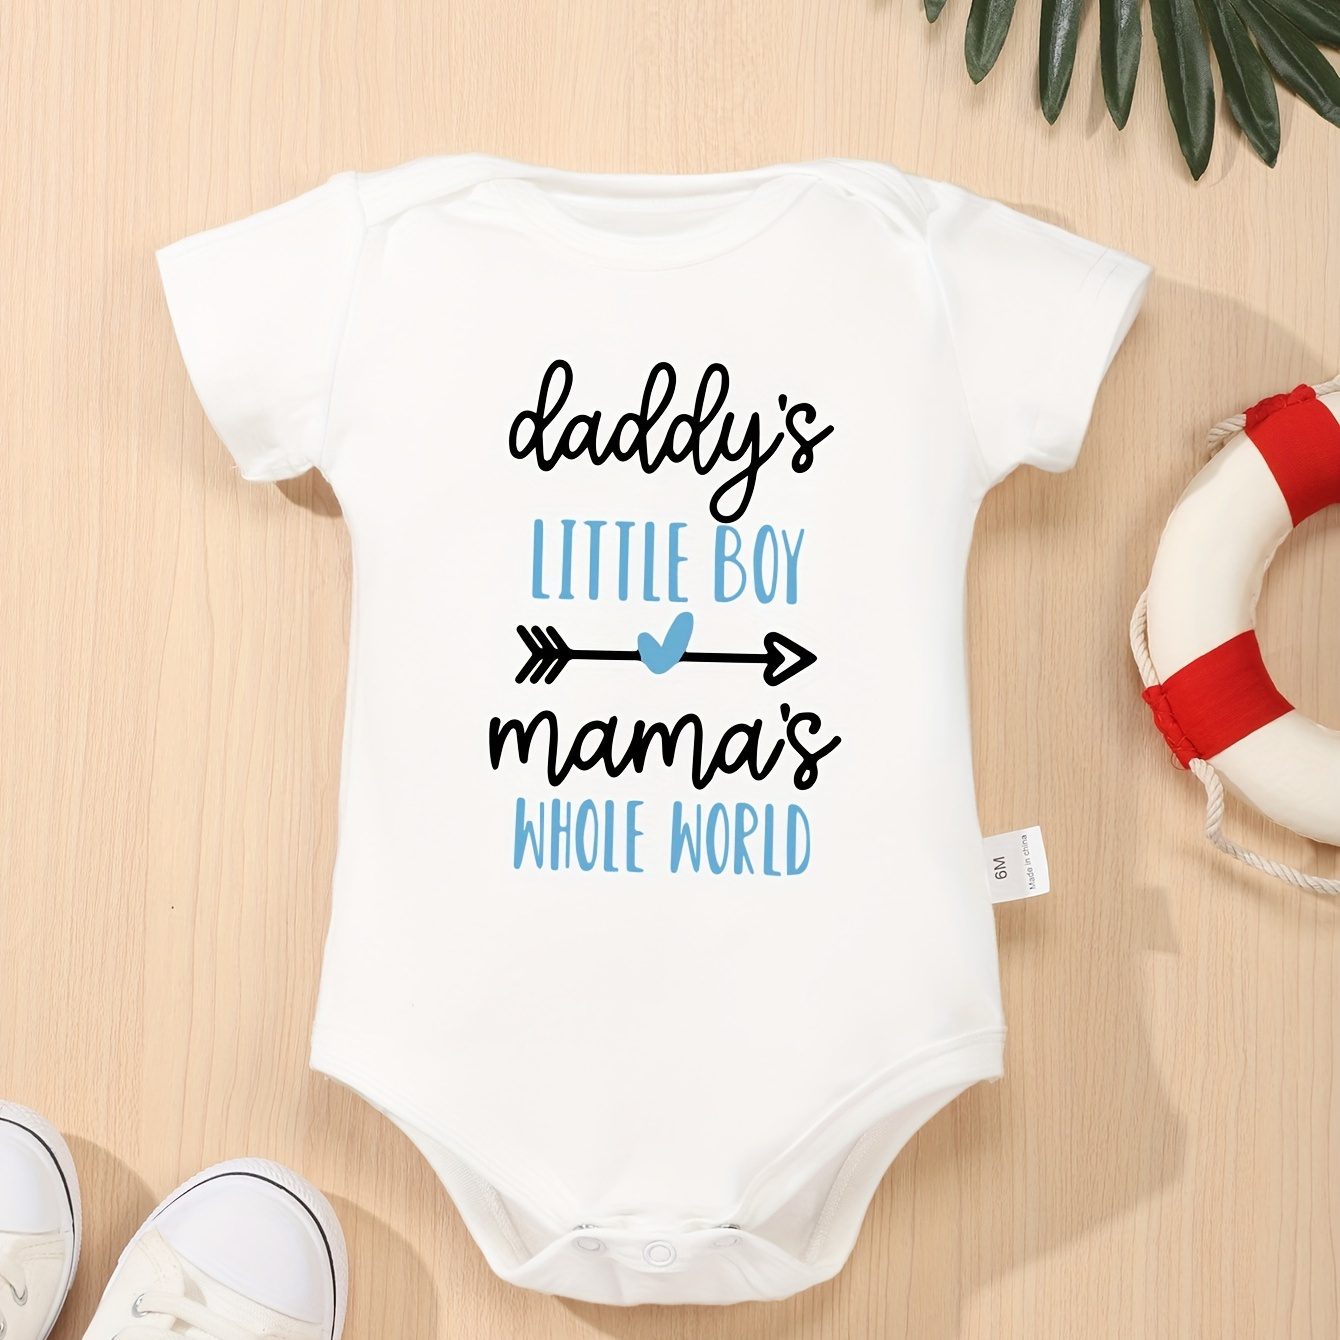 

daddy's Little Boy Mama's Whole World" Print Baby Boy's Cotton Bodysuit, Comfy Short Sleeve Onesie, Infant's Clothing, As Gift